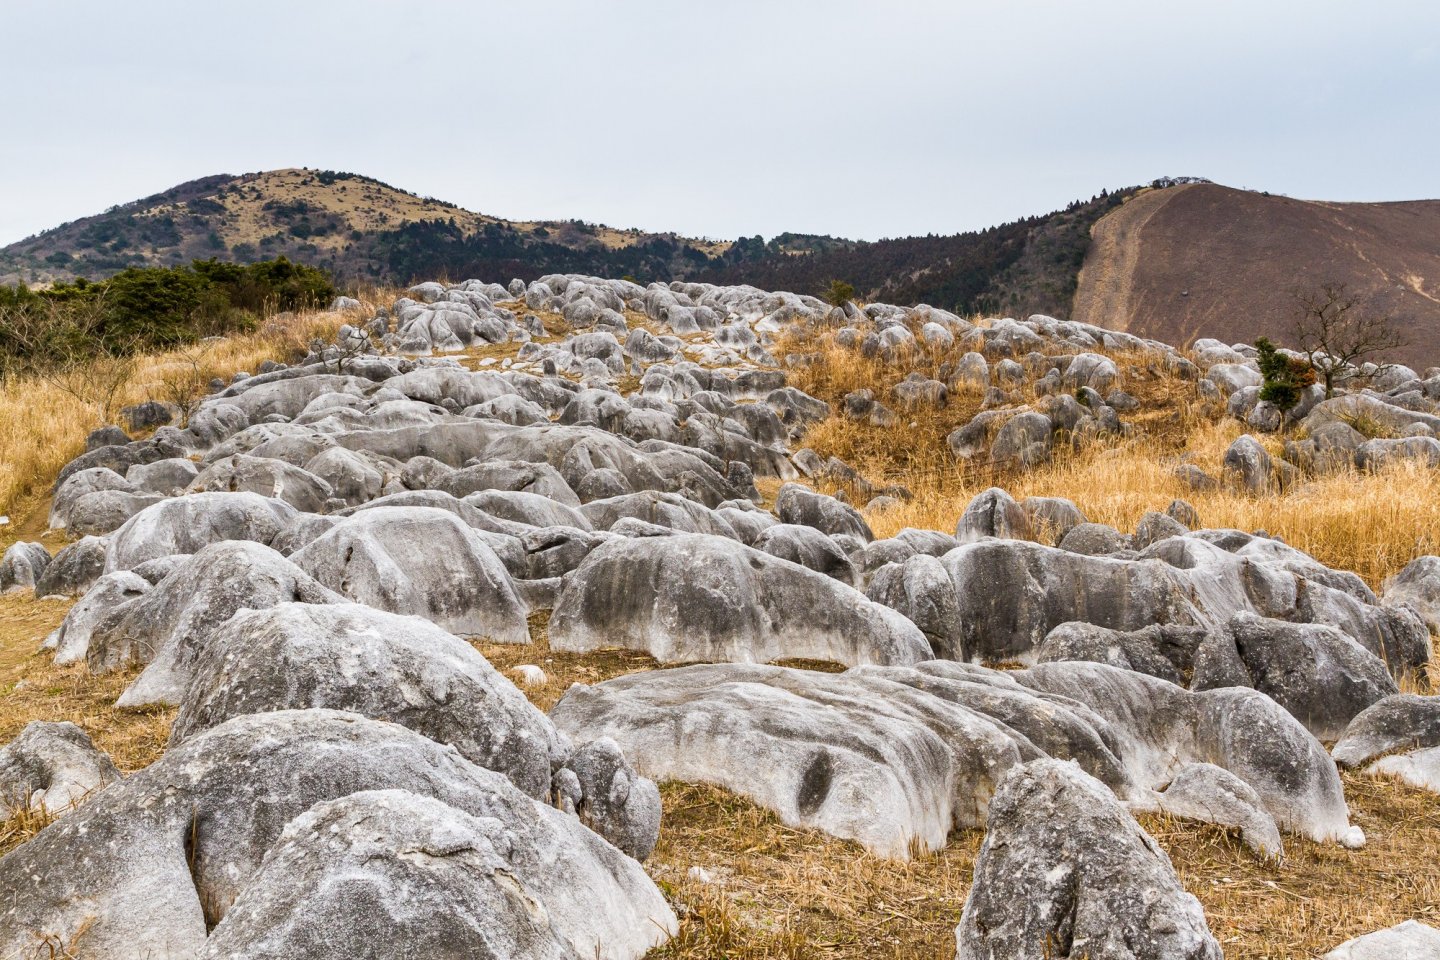 Winter view of Hiraodai Karst Plateau and its grassy mountainsides dotted with limestone formations